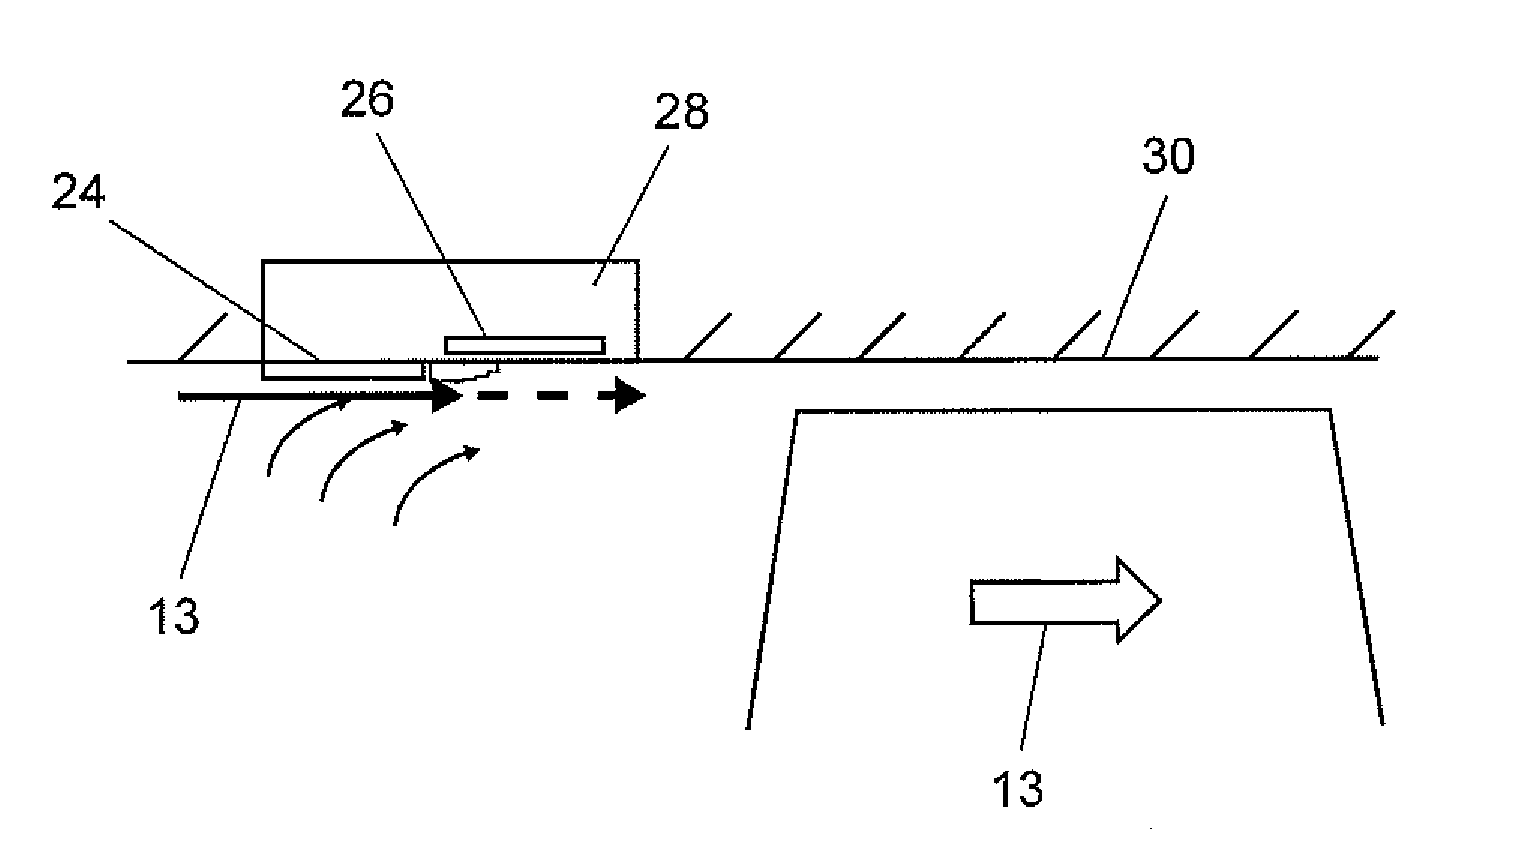 Apparatus and method for controlling a compressor